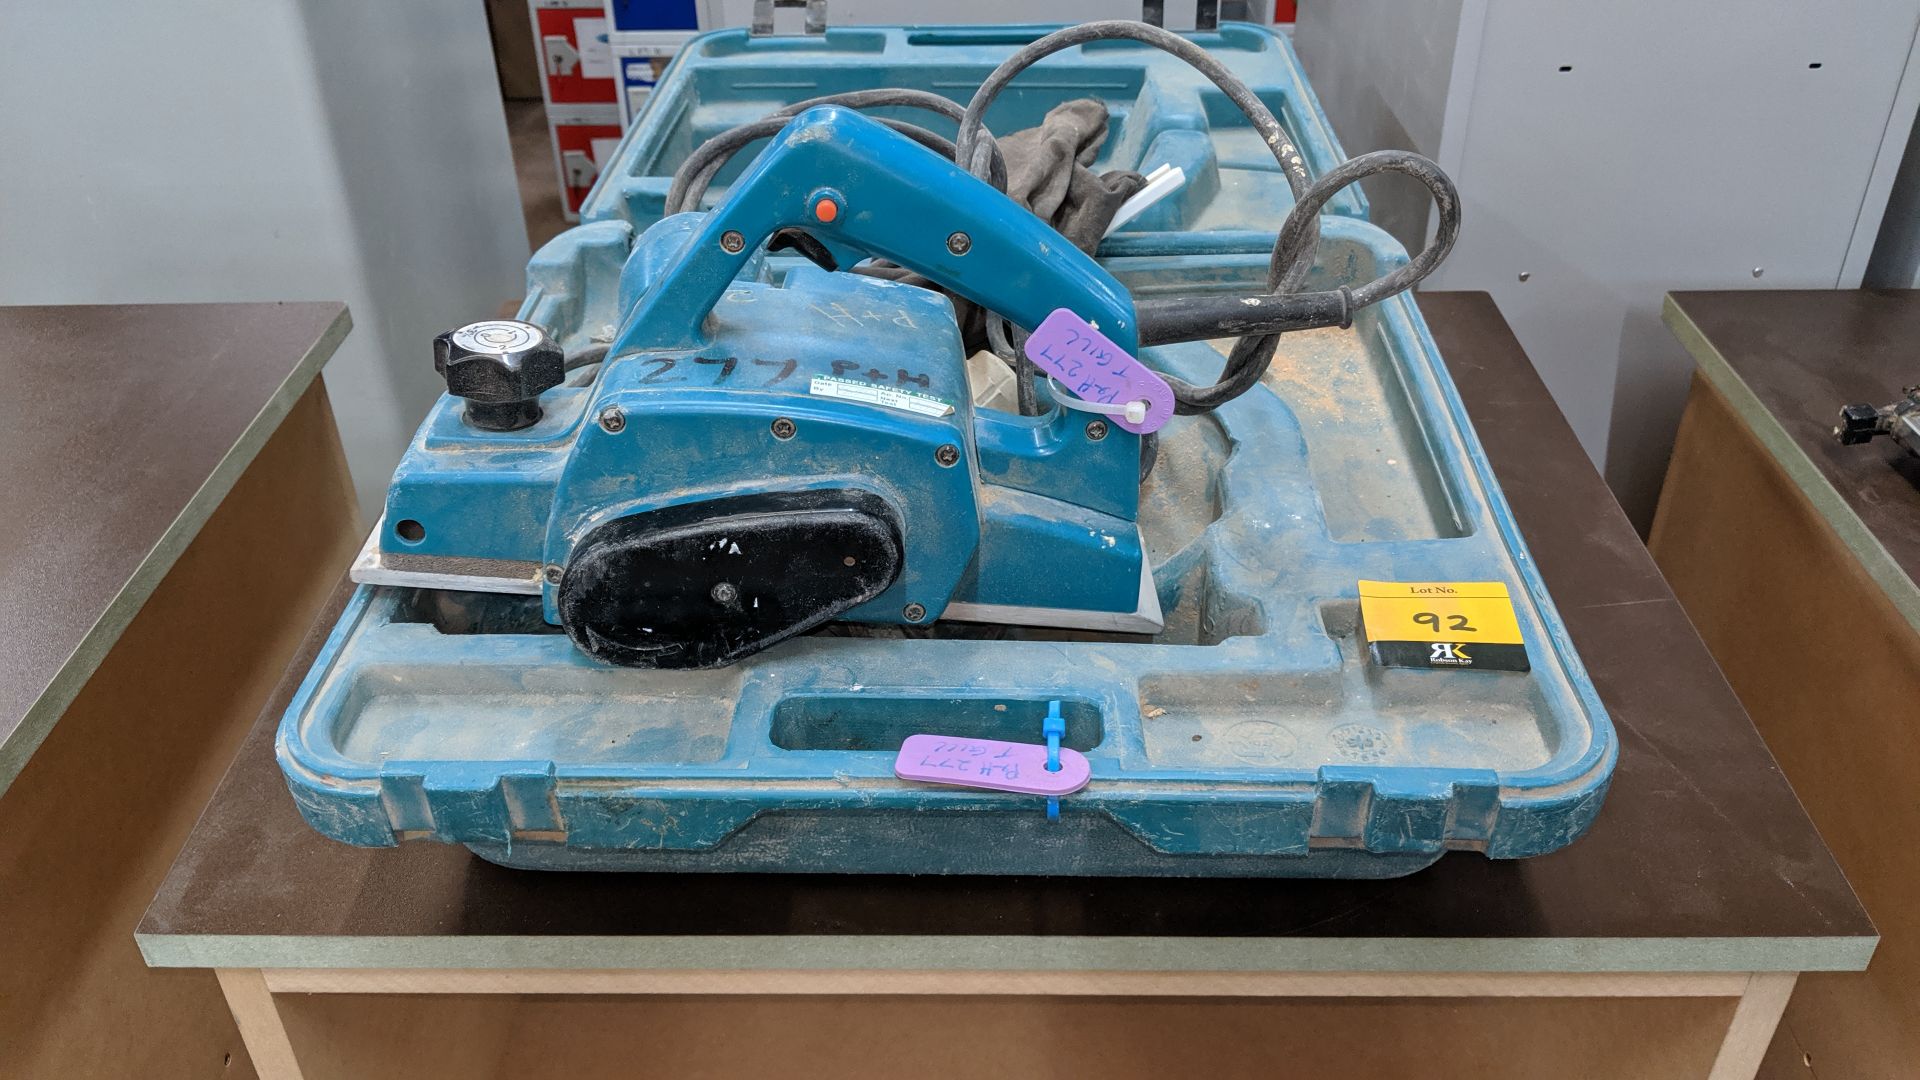 Makita 1923H 110v electric planer in case. This lot represents one of a small number of residual